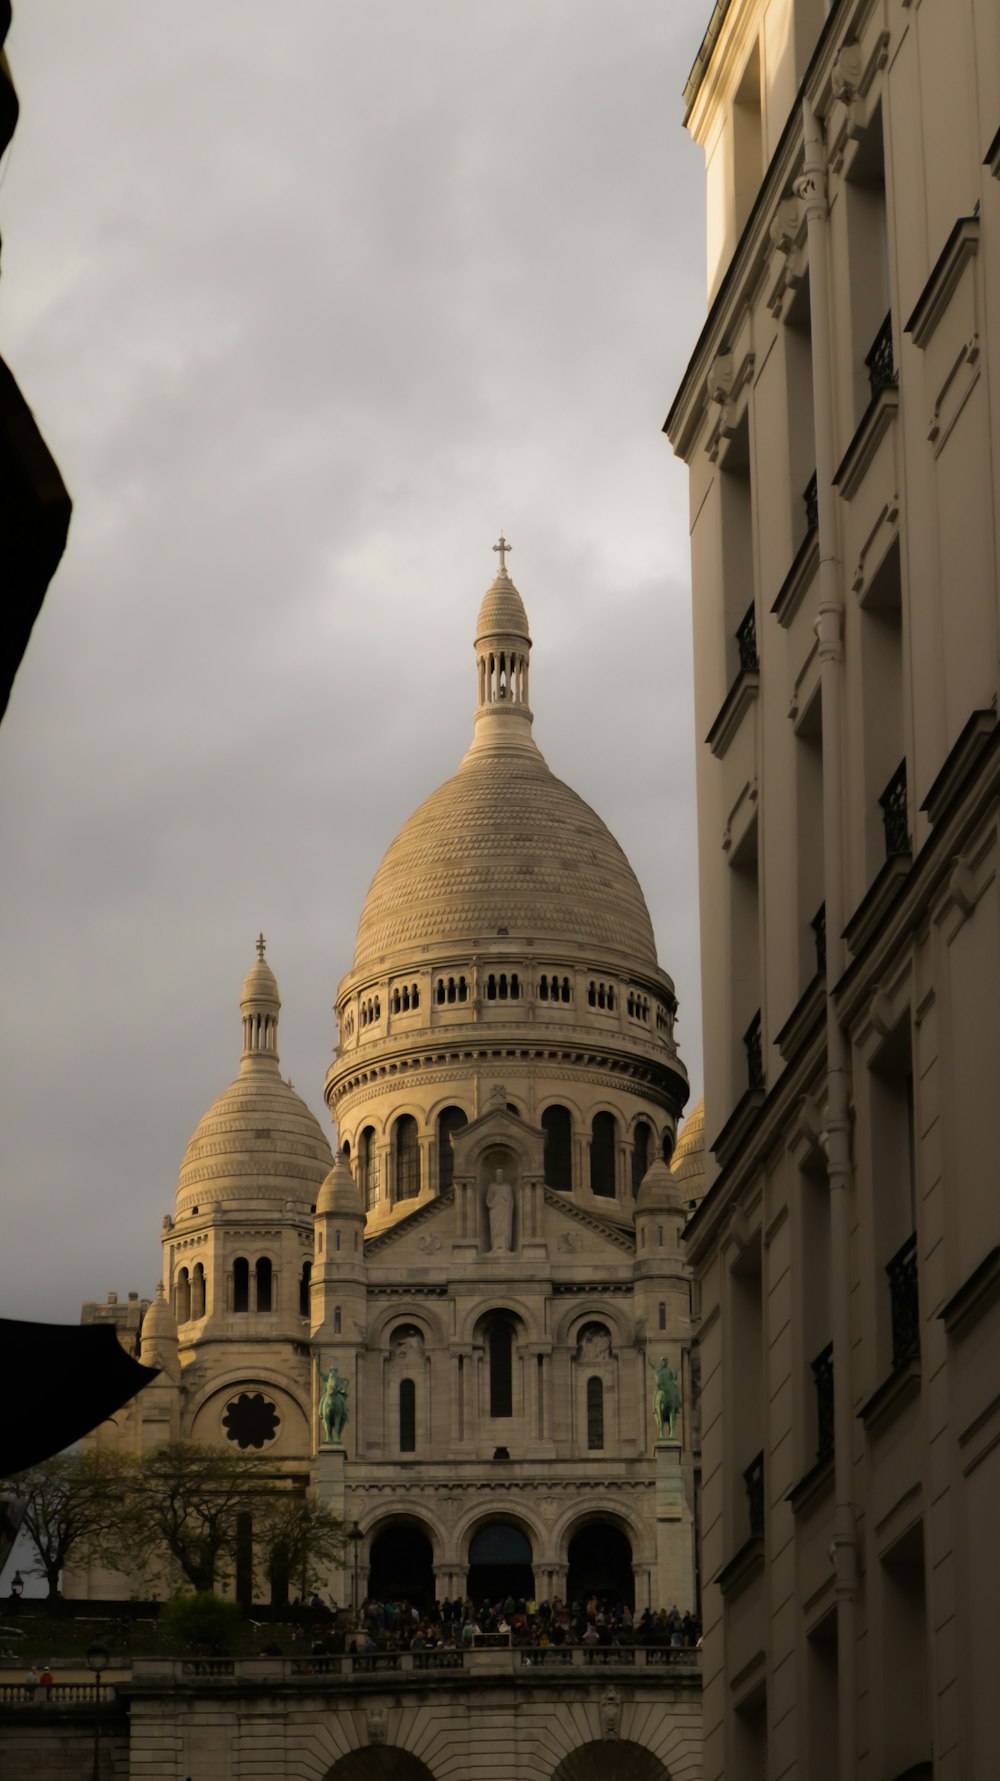 a large building with a domed roof with Sacré-Cœur, Paris in the background